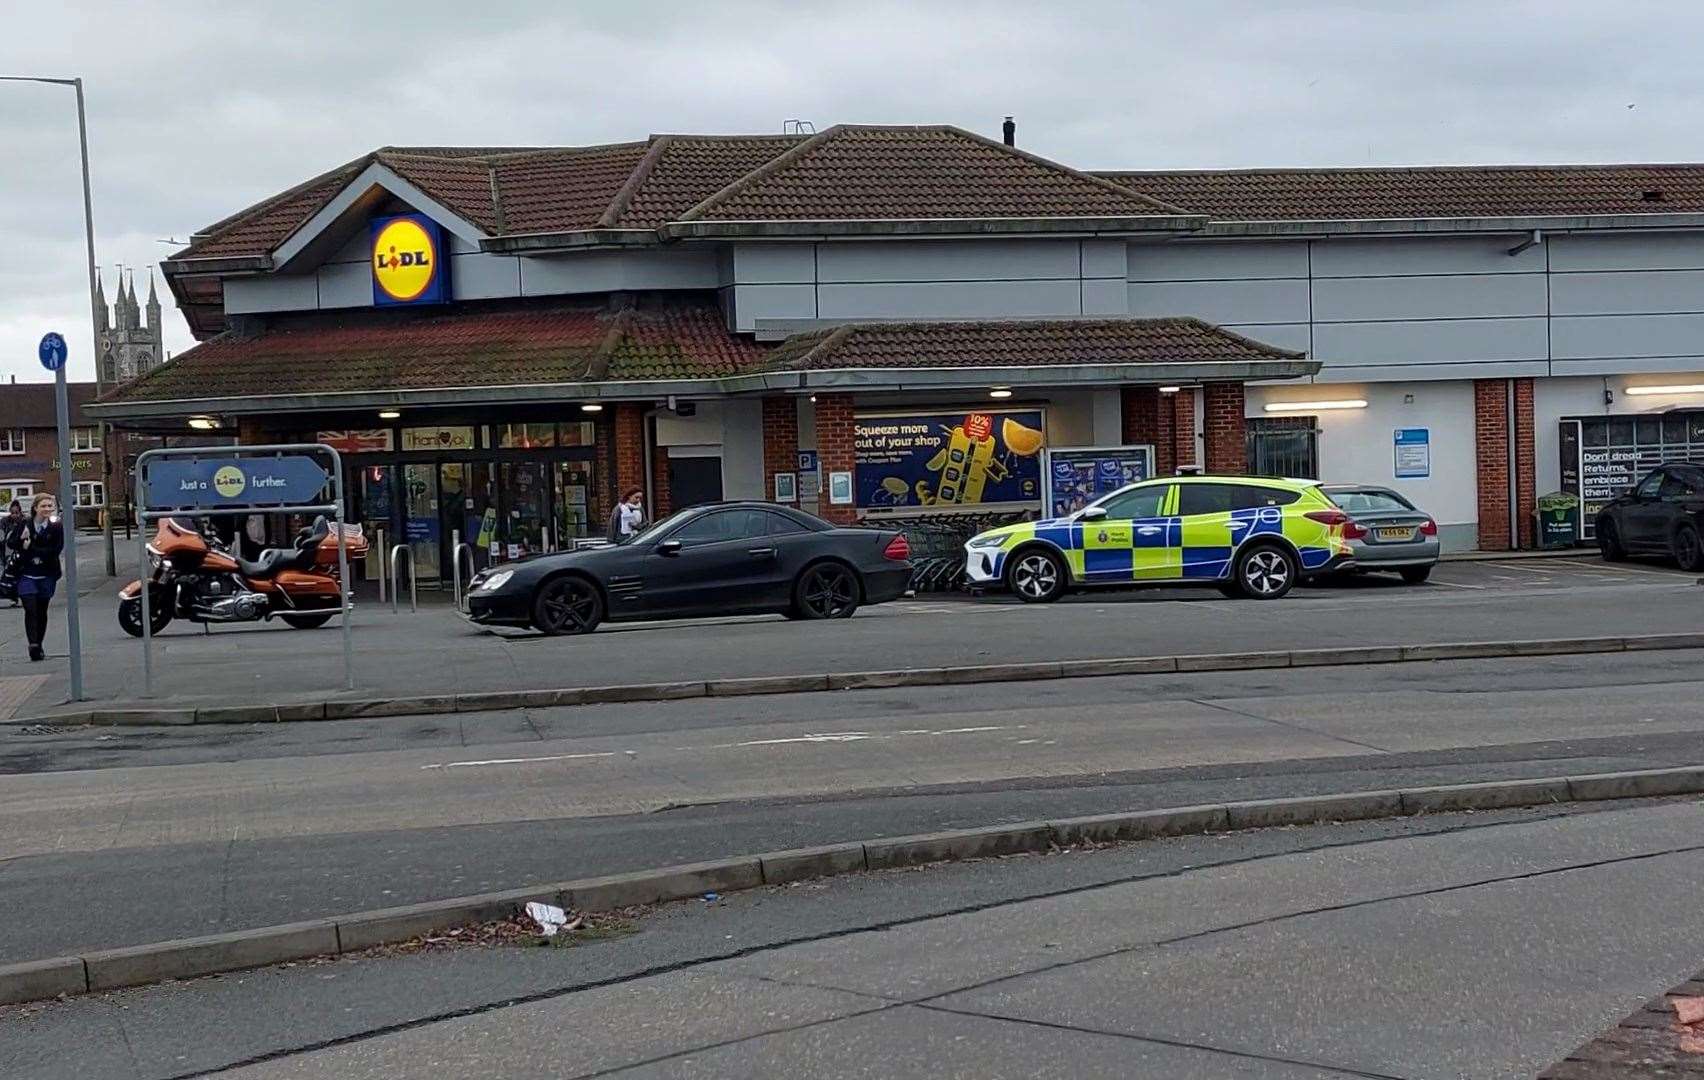 Two police cars were seen outside the store in New Street